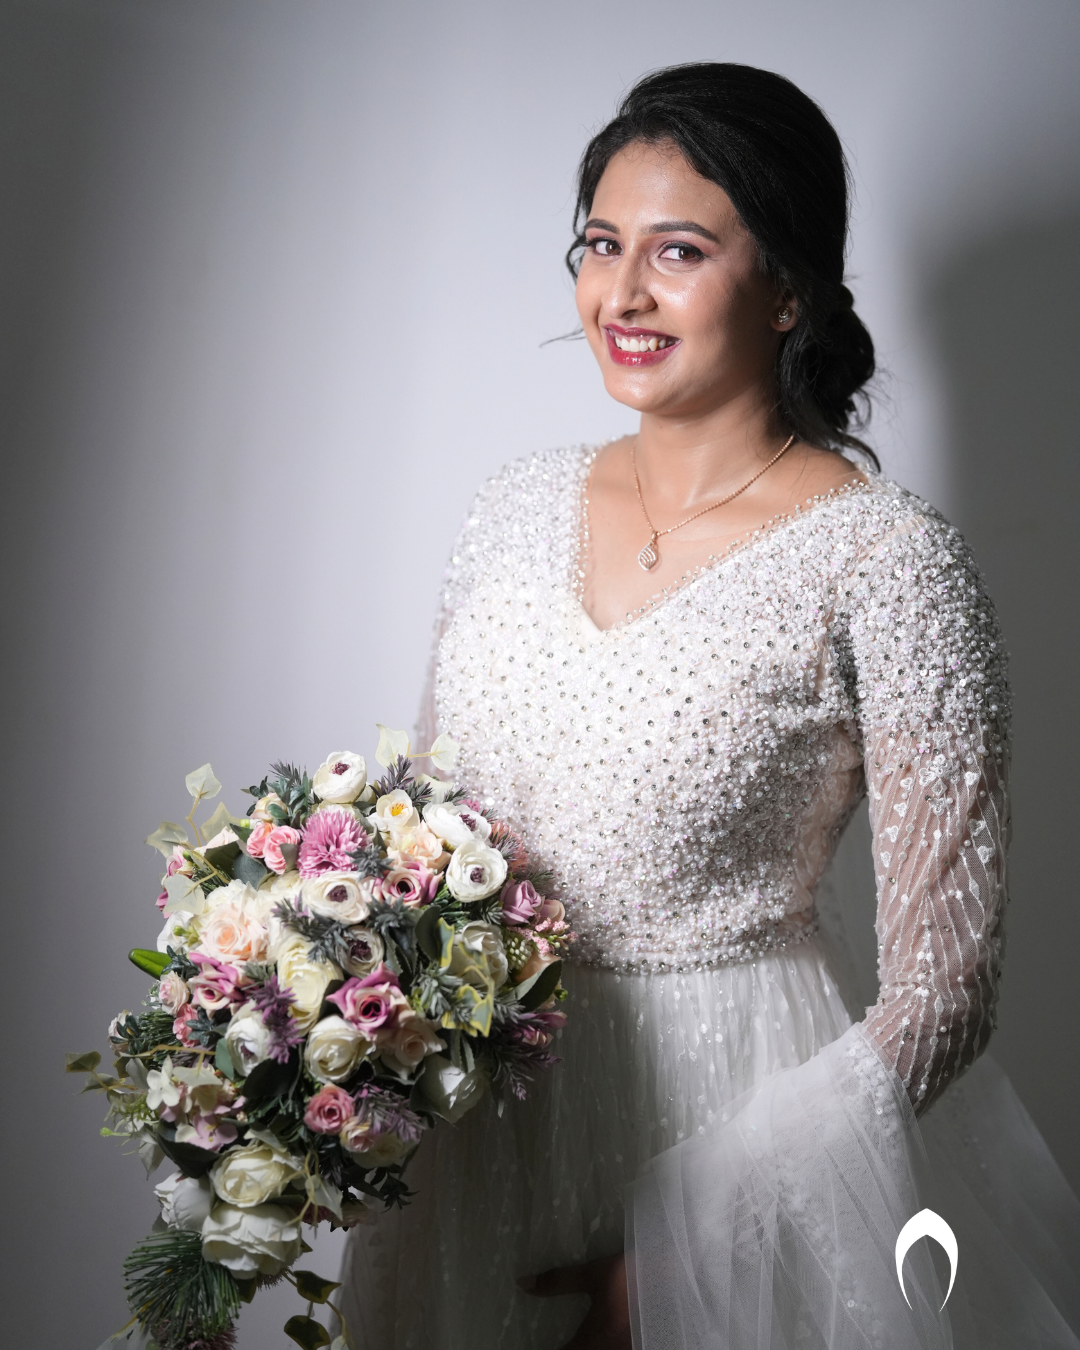 Signature christian bridal Aline gown featuring intricate handwork with beads and pearls